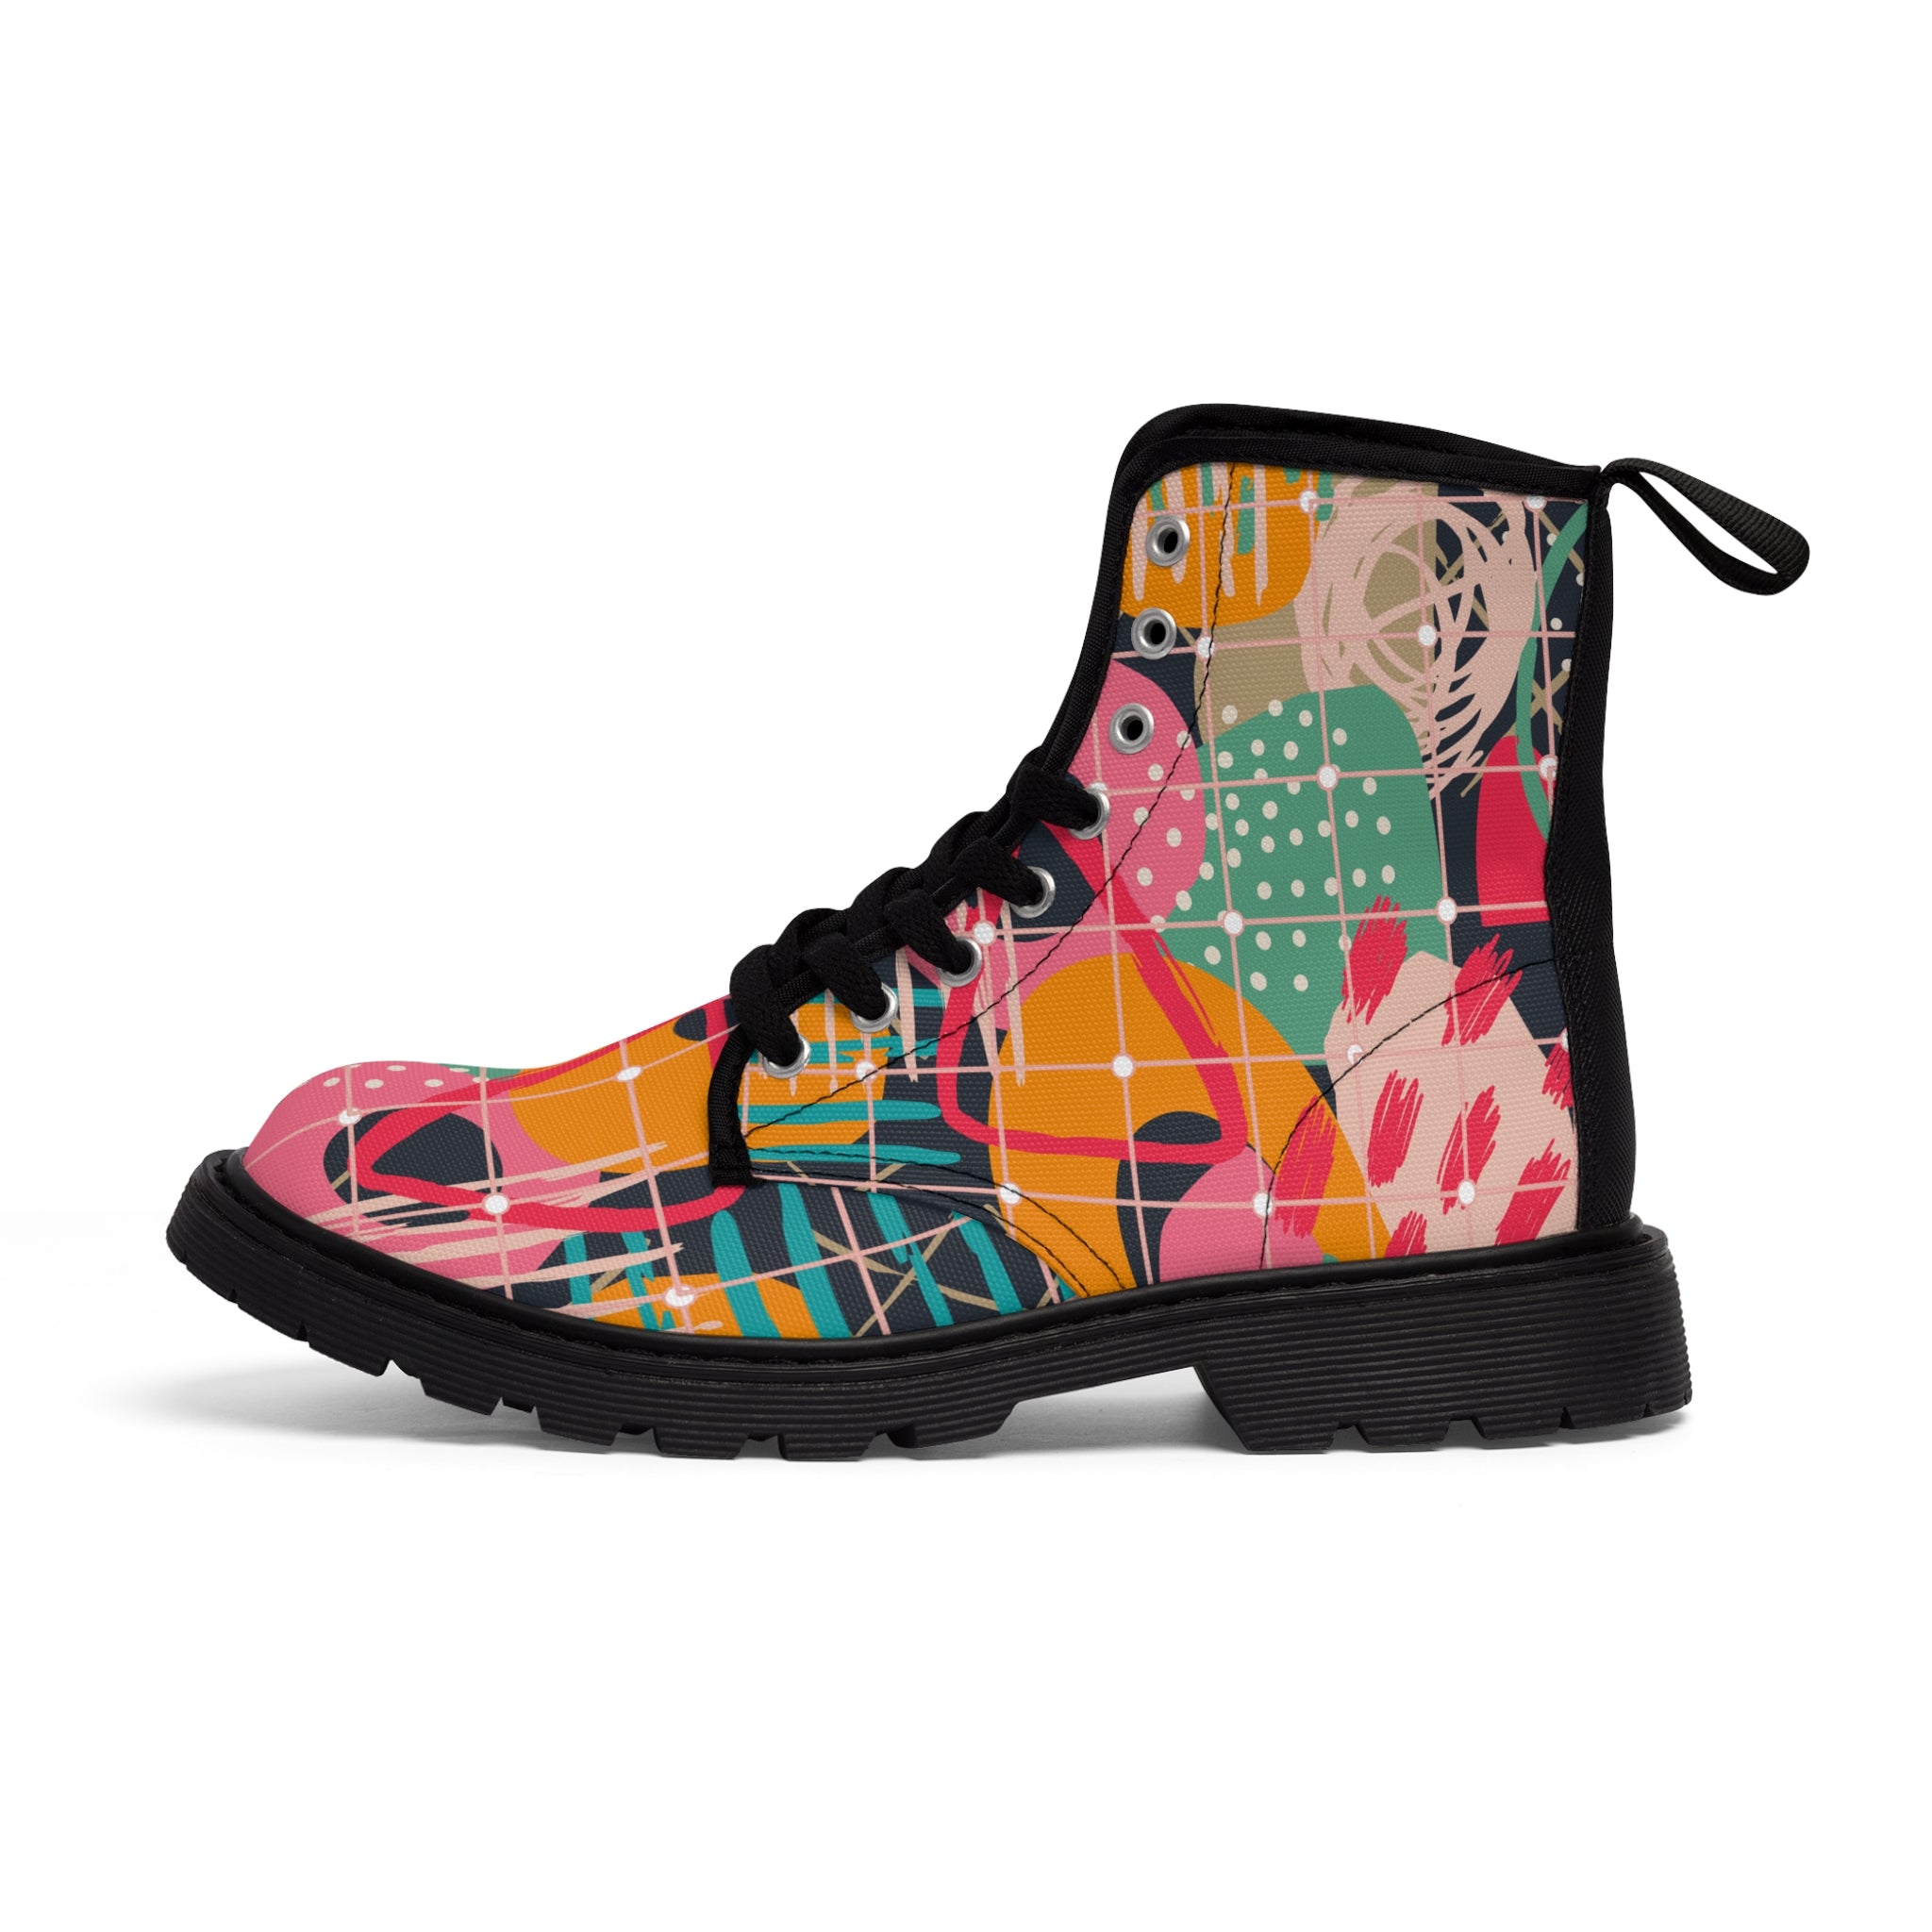 Custom Designer Canvas Lace up Boots for Women with Abstract Prints Perfect Mother's Day Gift